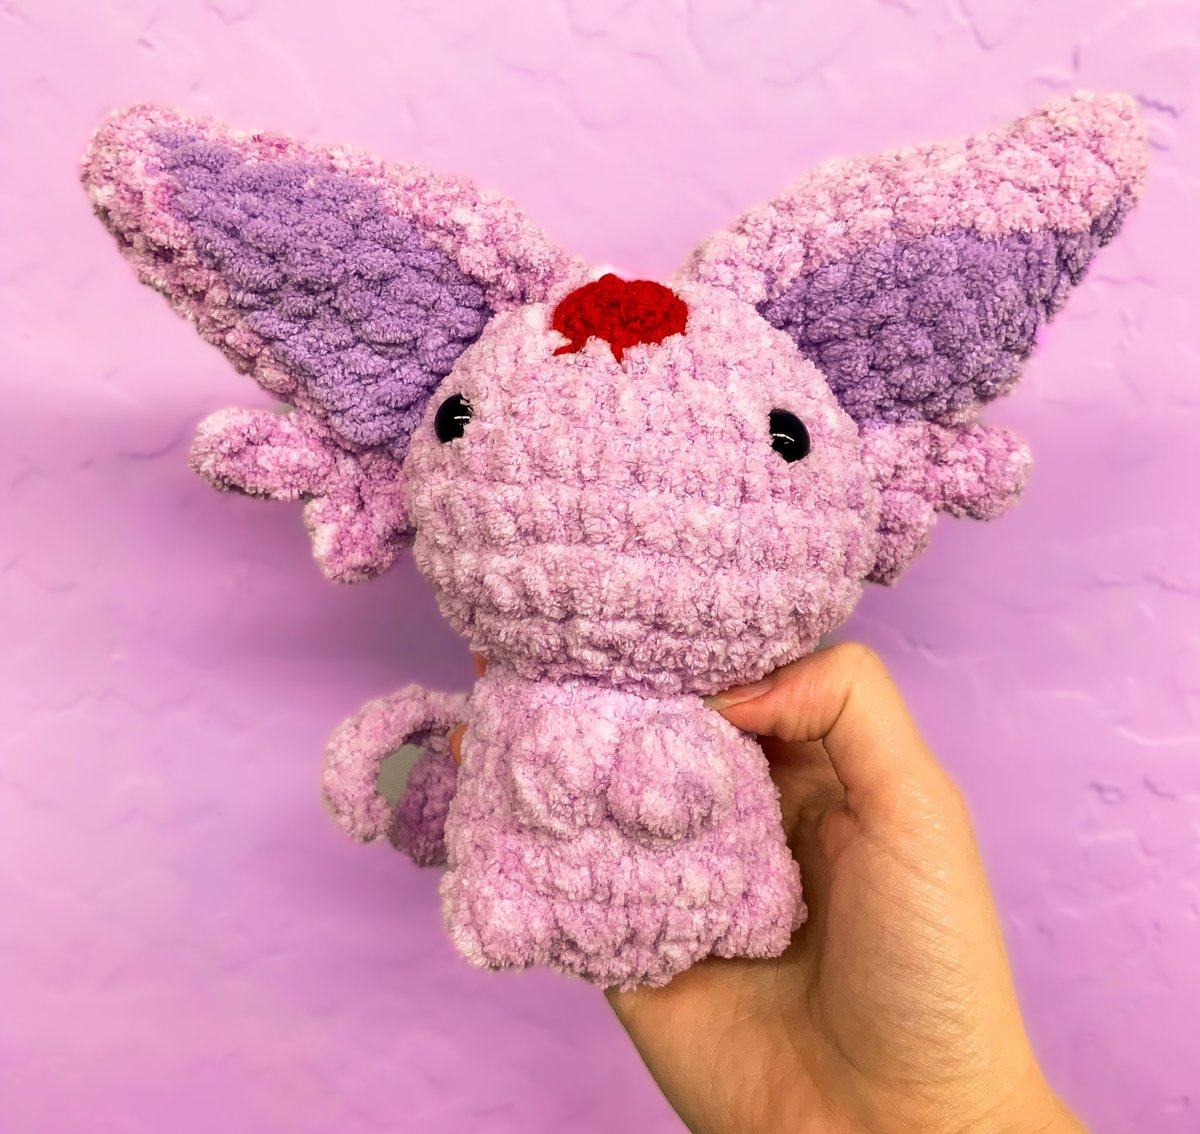 Finally posting again on here, just now with a different hobby that I’m loving again. . . . #crochet #espeon #pokemon #crochetplushie #crochetpokemon